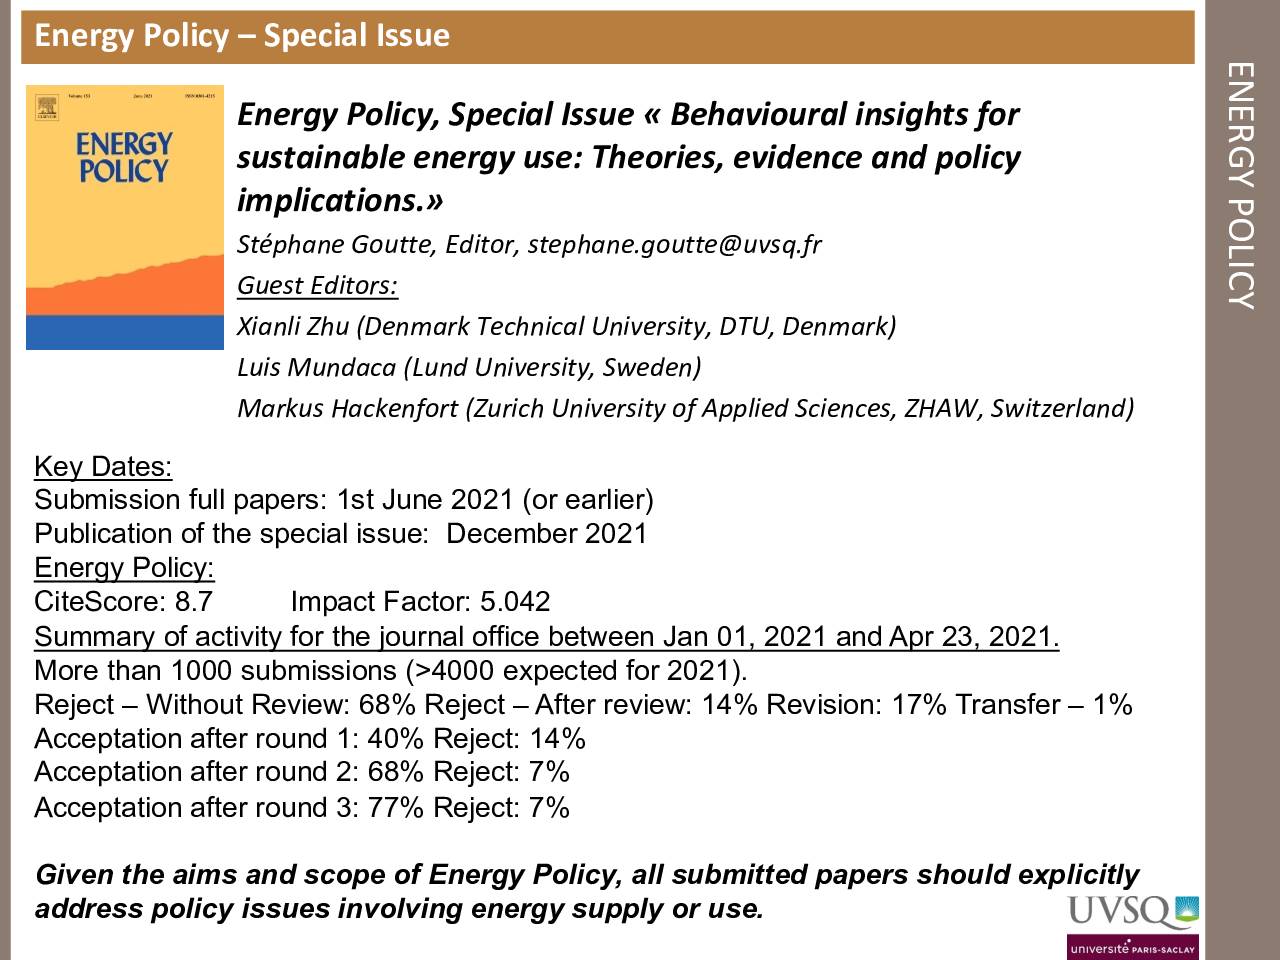 Process and Procedures of the Energy Policy Special Issue